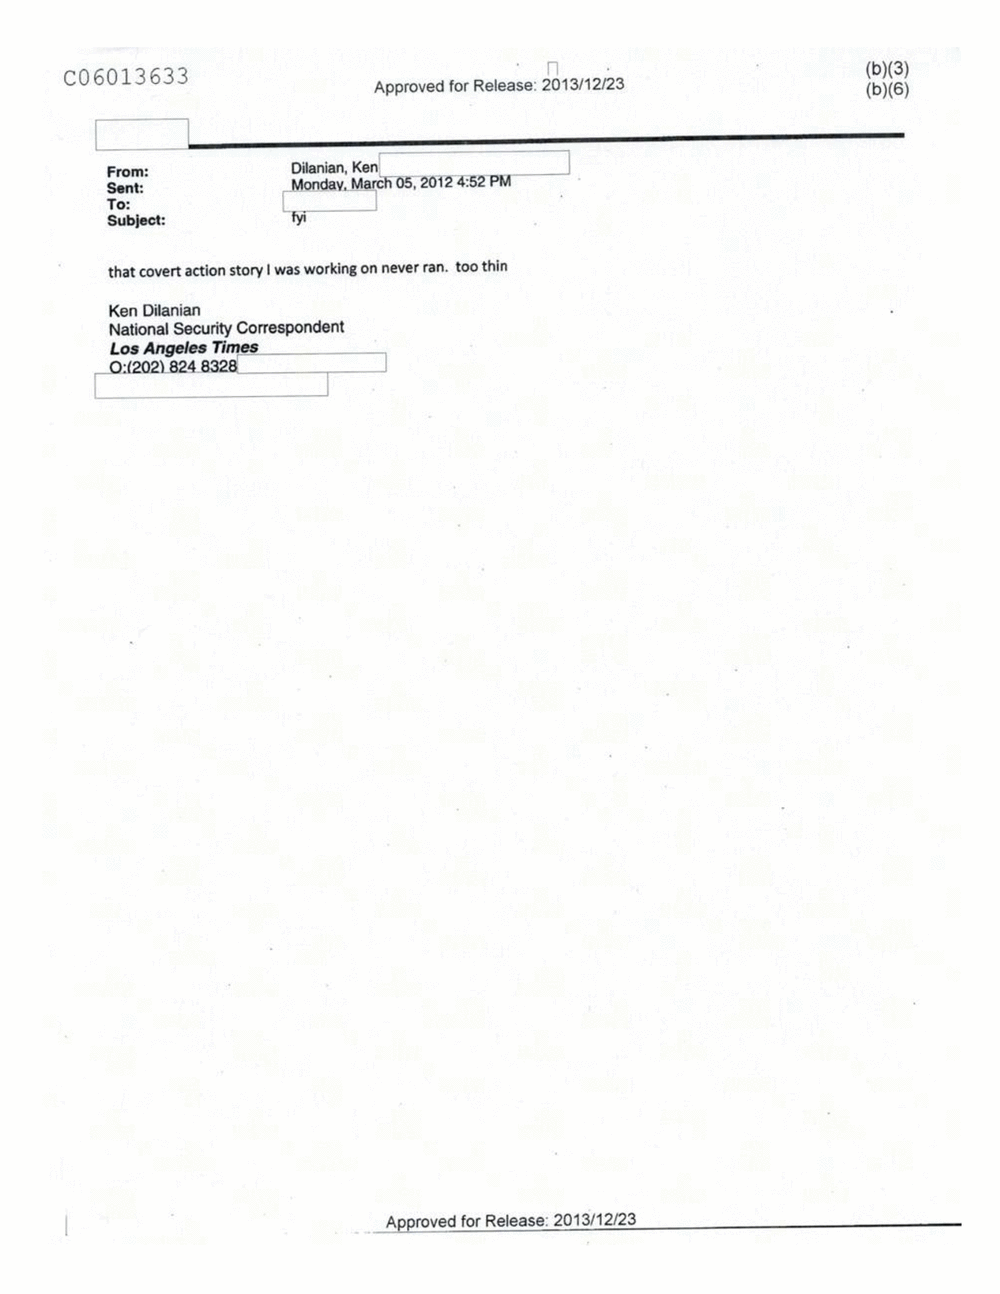 Page 470 from Email Correspondence Between Reporters and CIA Flacks